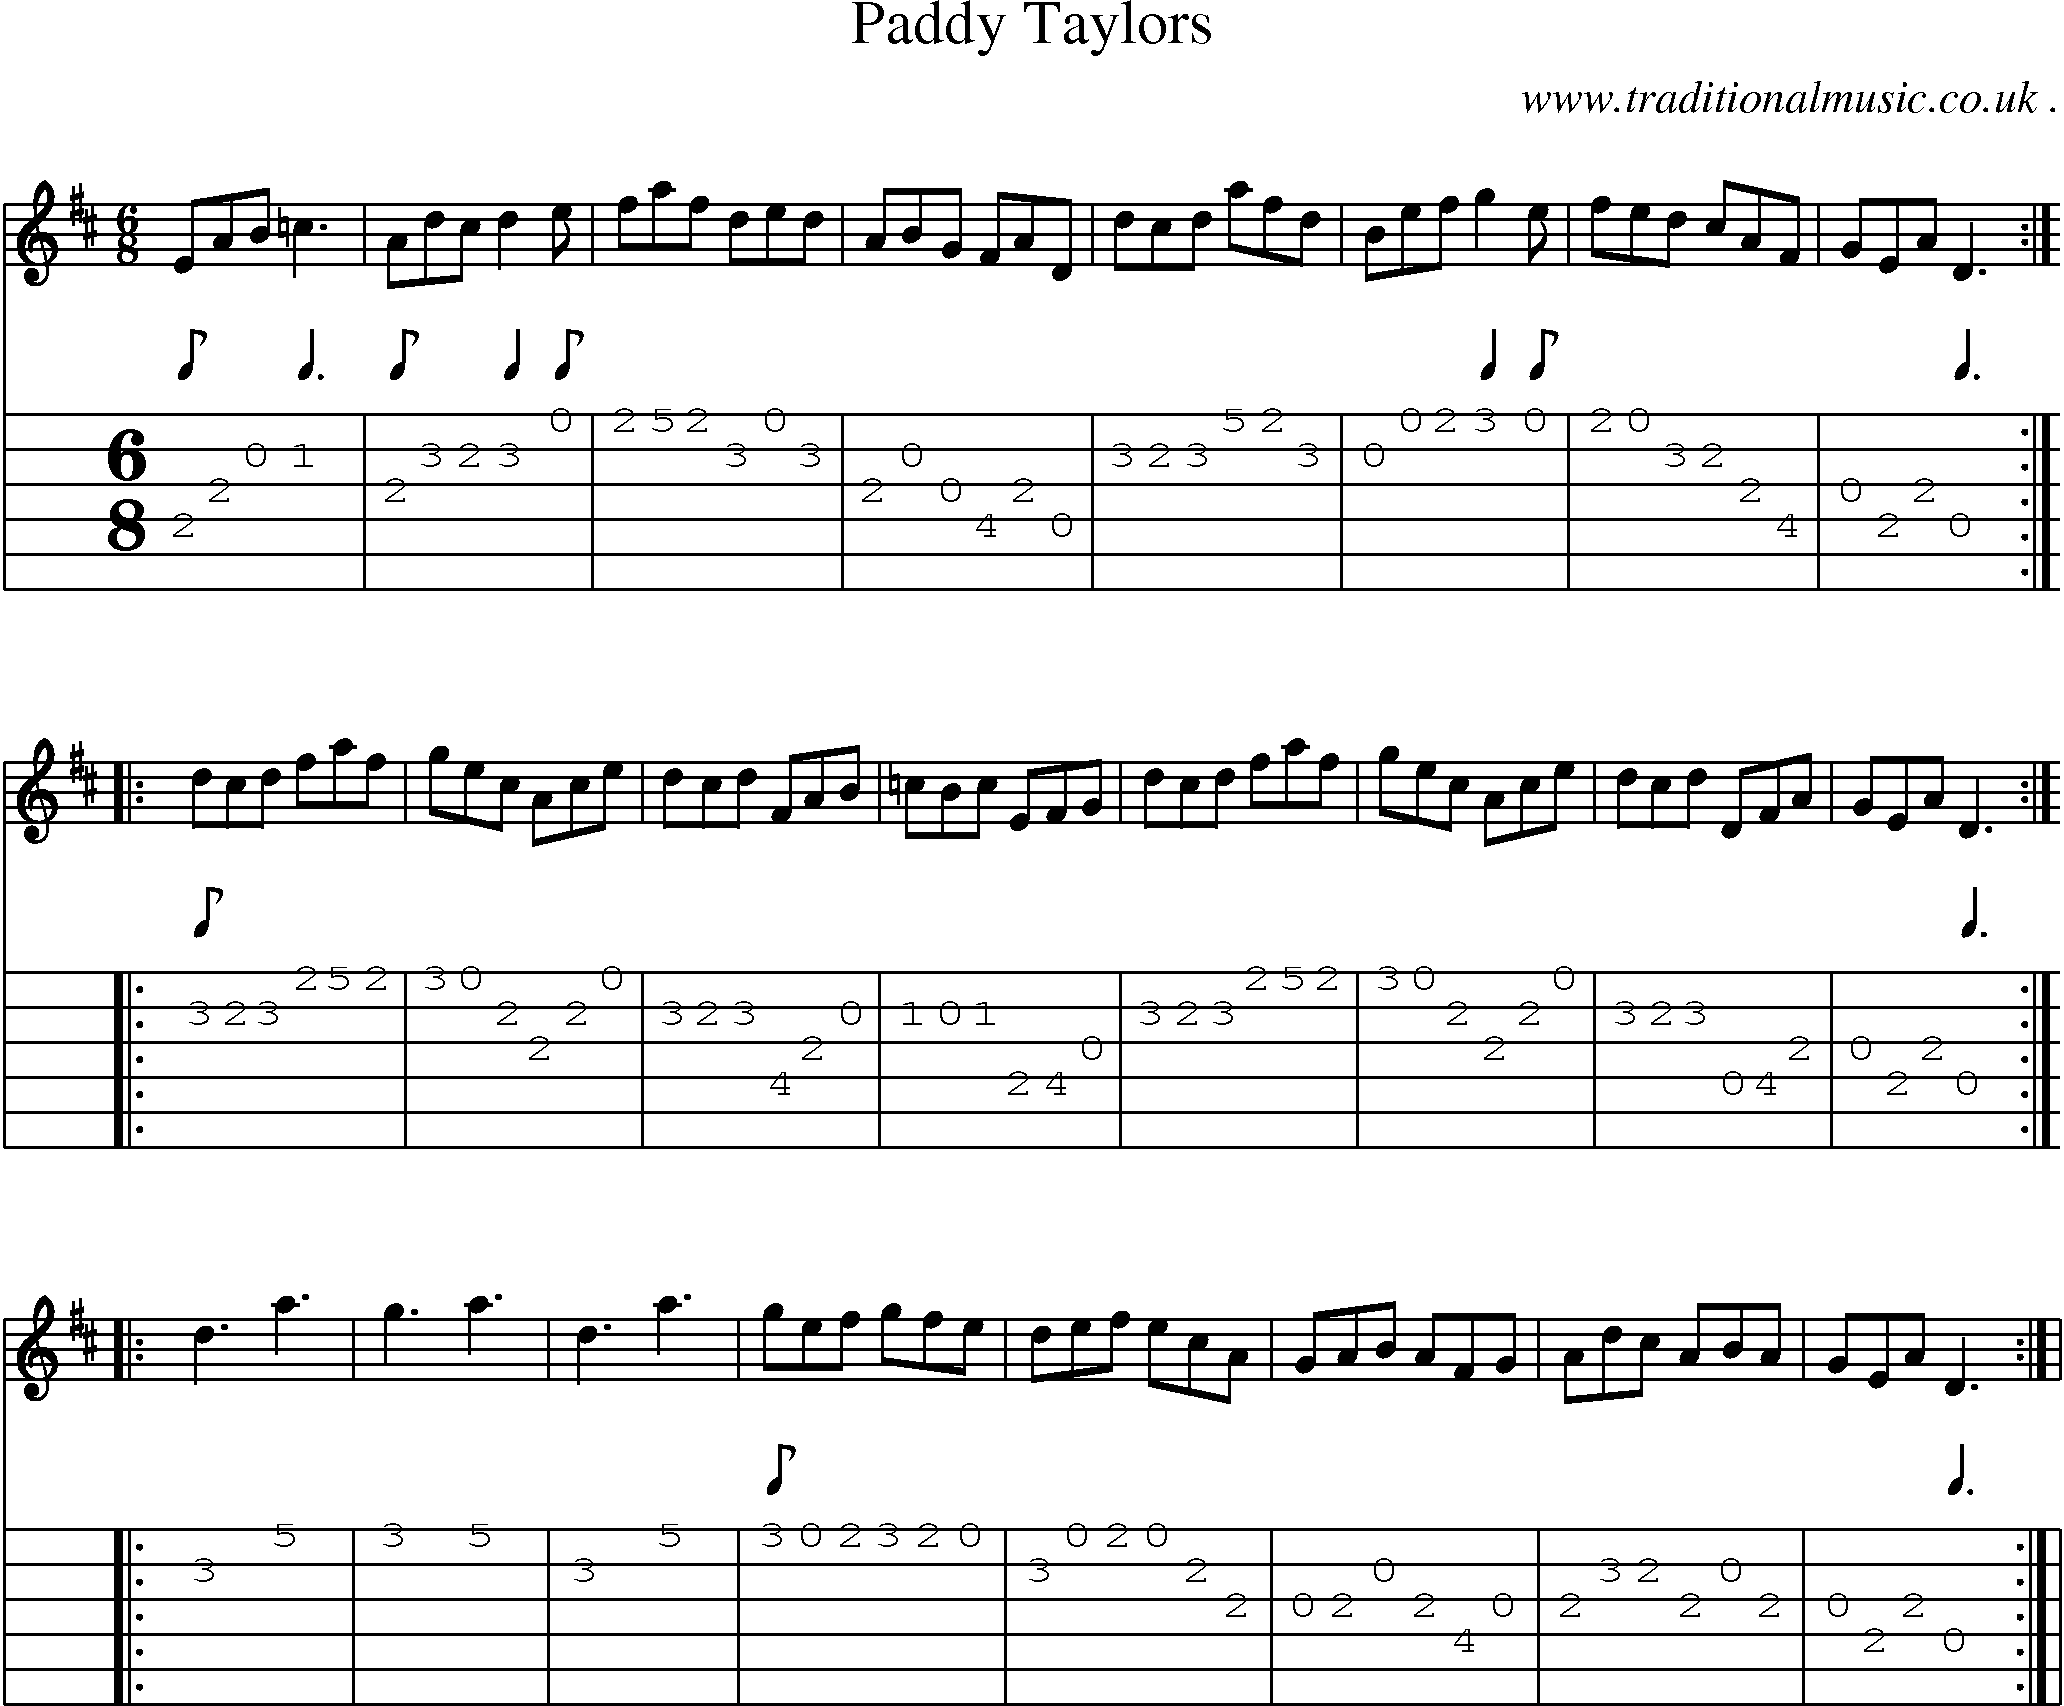 Sheet-Music and Guitar Tabs for Paddy Taylors